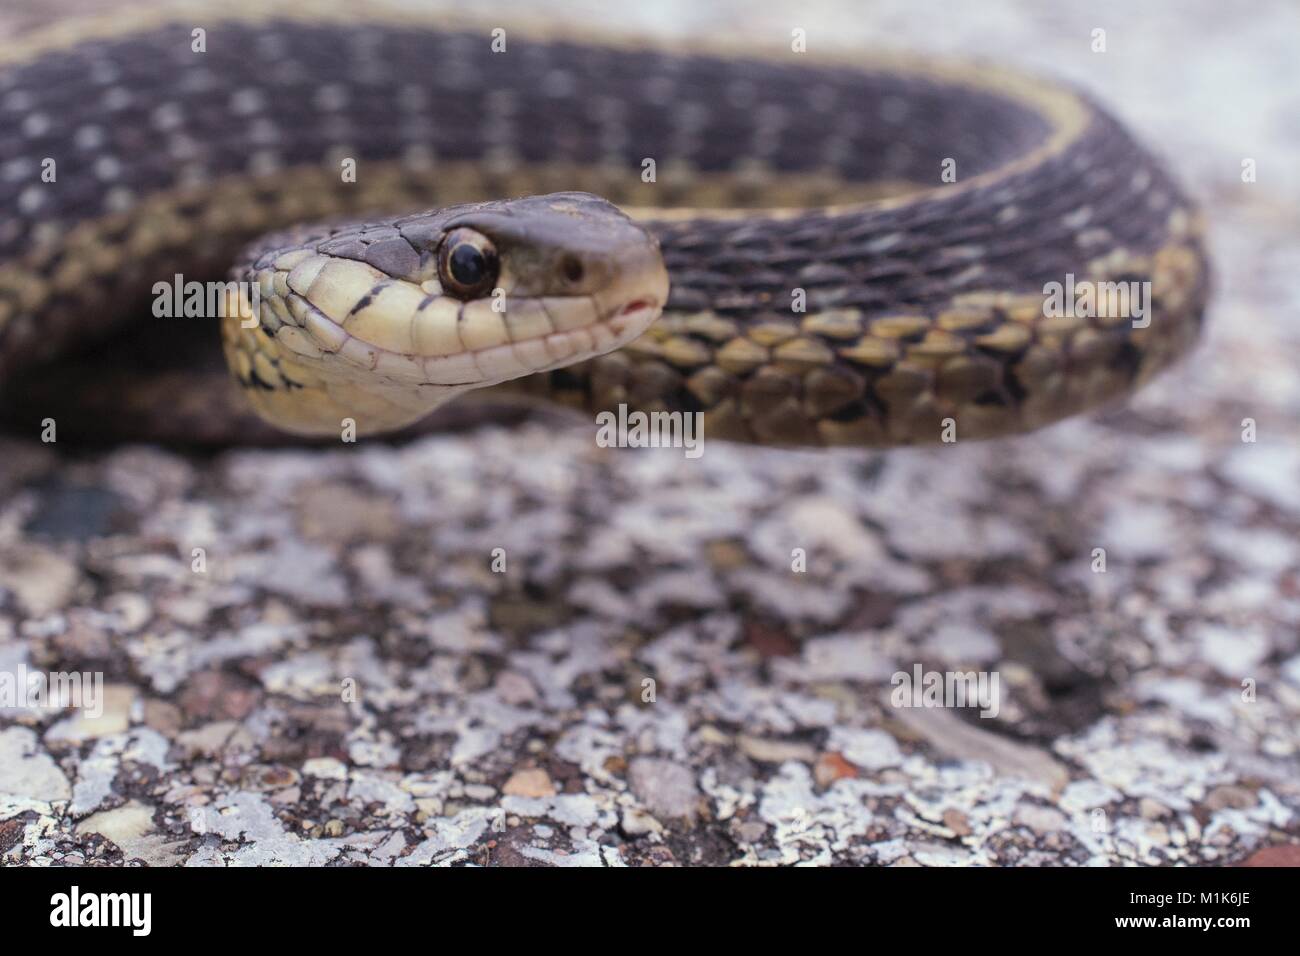 Garter snake with it's split tongue sticking out. Class Reptilia, Order Squamata, Suborder Serpentes, Family Colubridae, Species T. Sirtalis Stock Photo